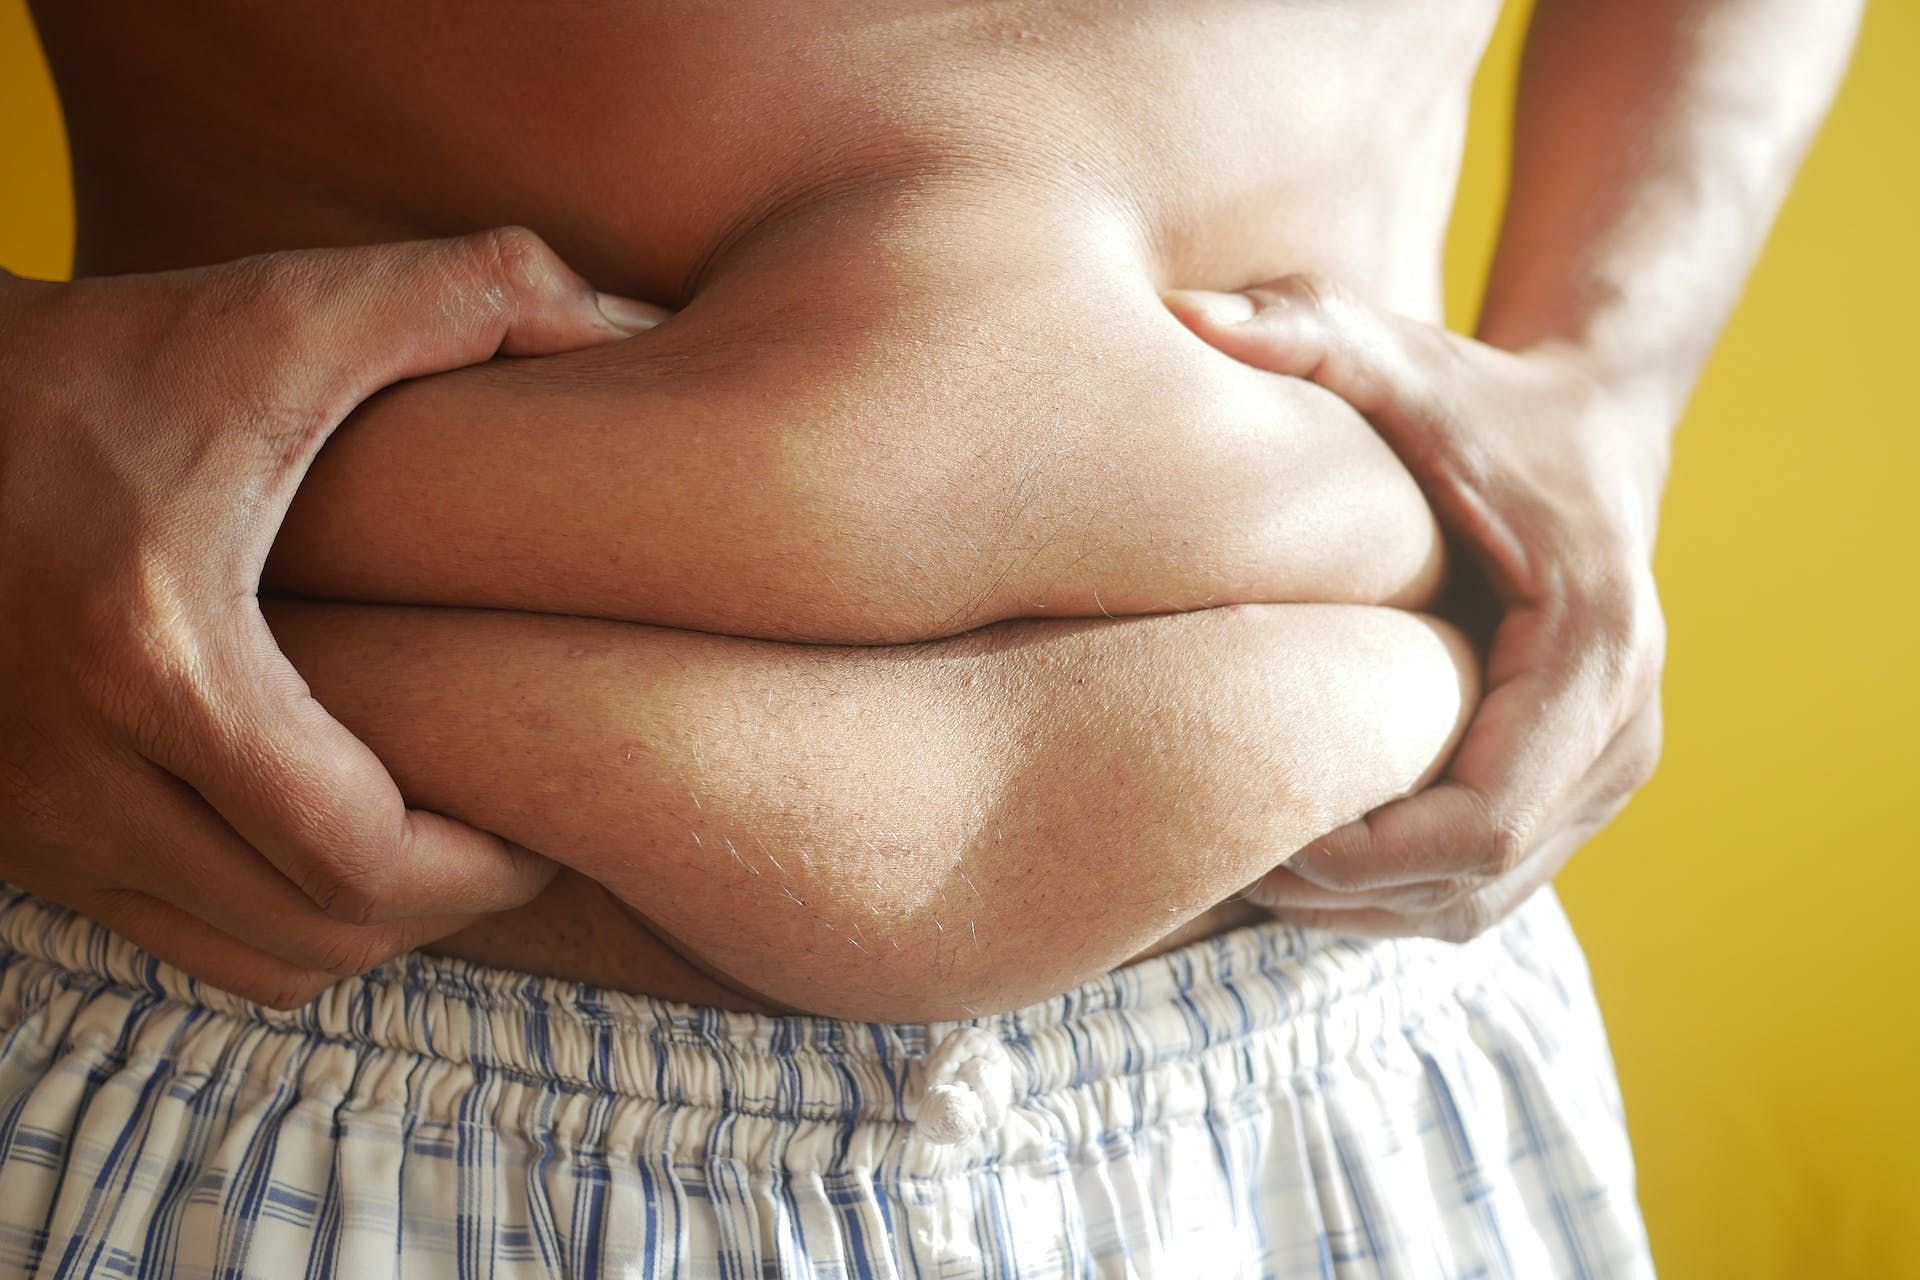 Obese people are more likely to develop a fungal infection on their skin. (Image via Pexels/Towfiqu barbhuiya)